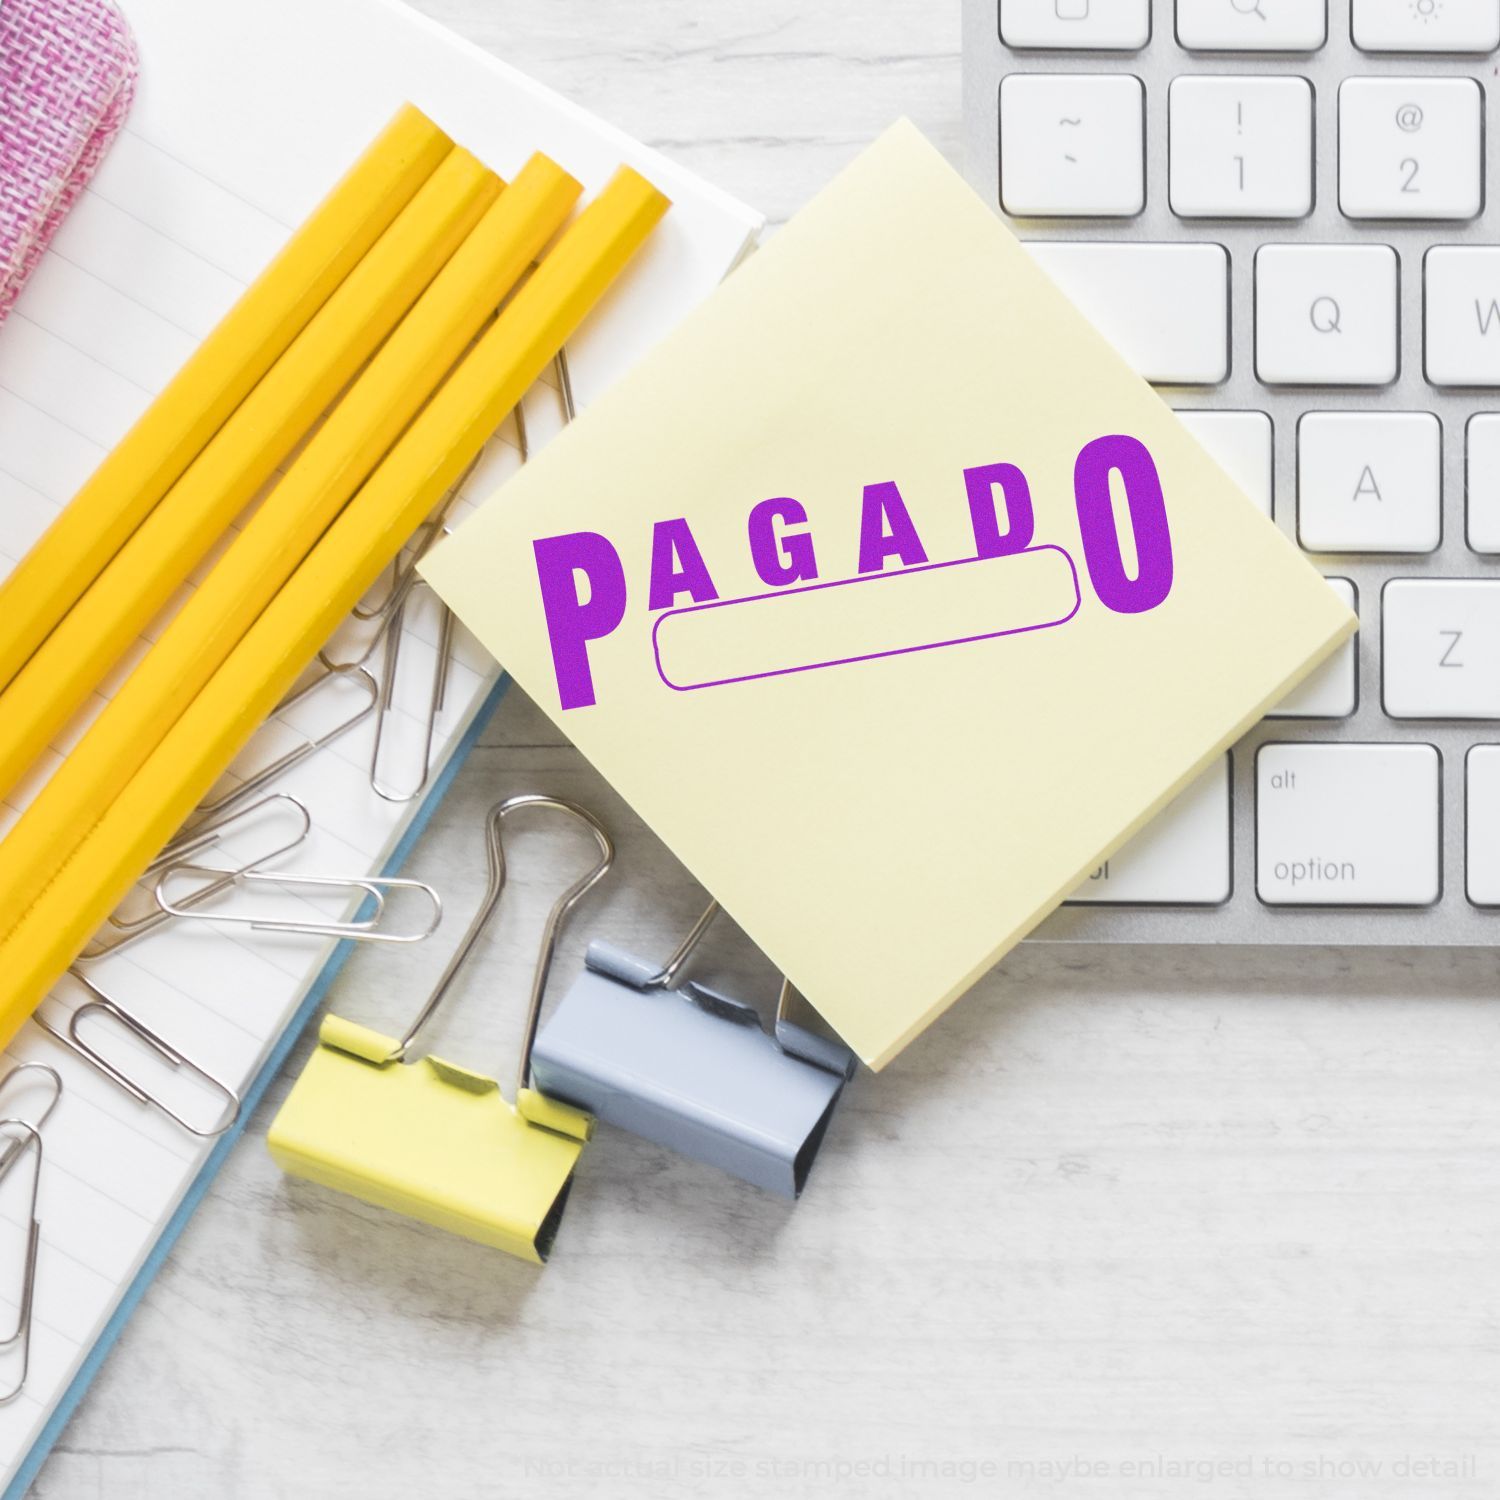 A self-inking stamp with a stamped image showing how the text "PAGADO" with a box under it is displayed after stamping.